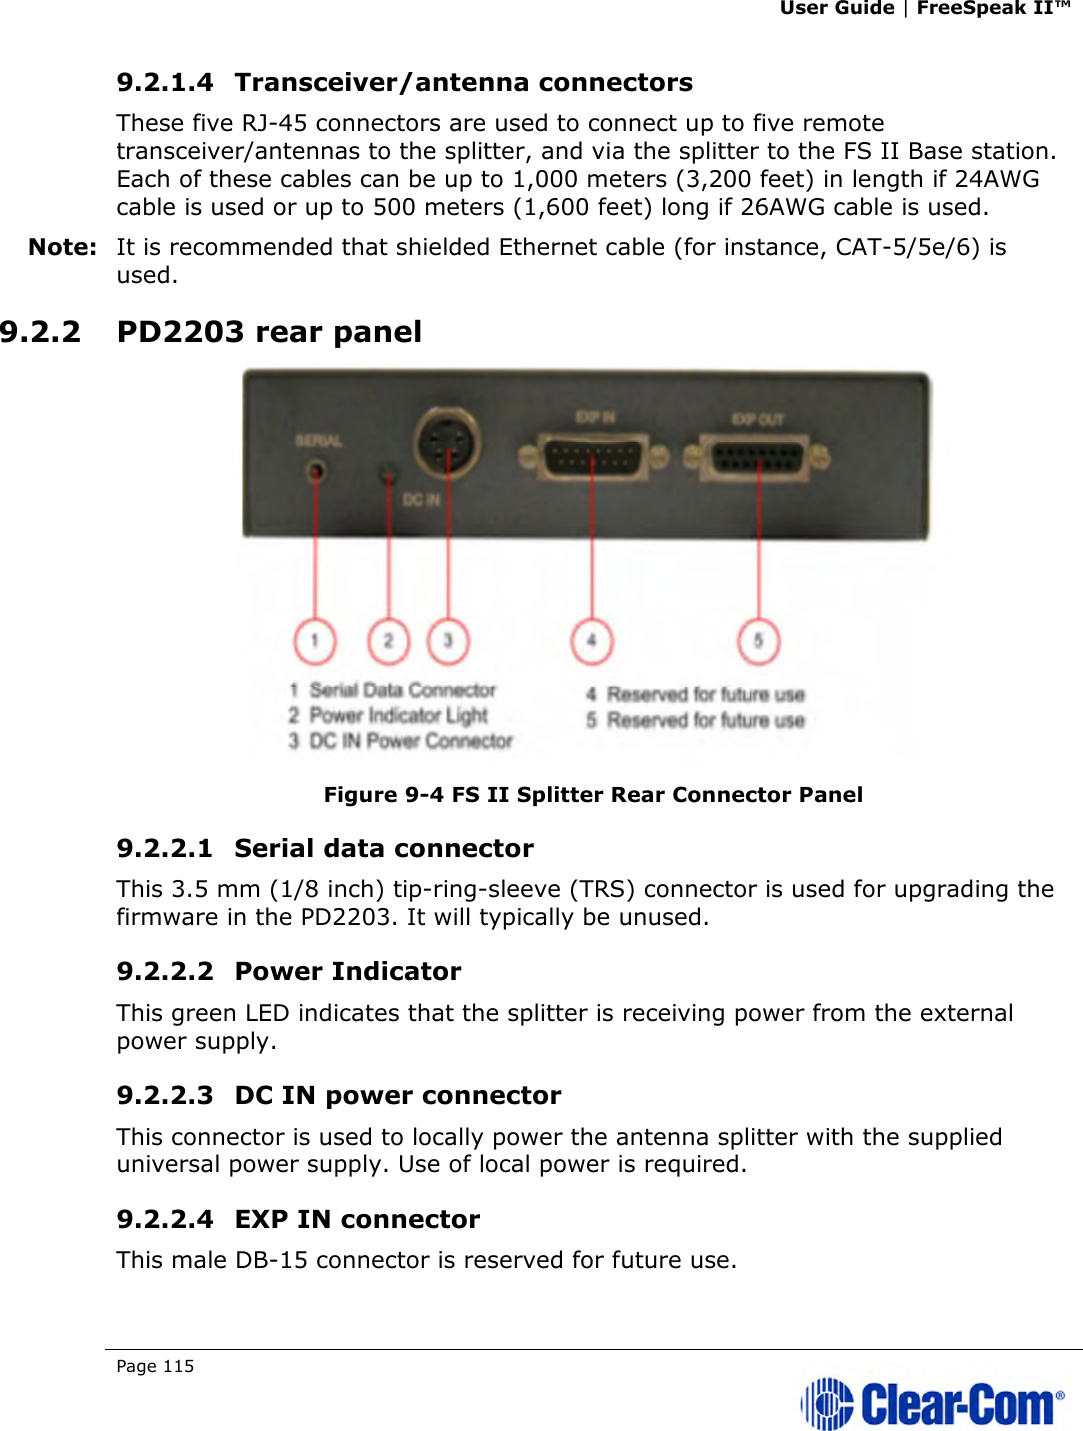 User Guide | FreeSpeak II™  Page 115   9.2.1.4 Transceiver/antenna connectors  These five RJ-45 connectors are used to connect up to five remote transceiver/antennas to the splitter, and via the splitter to the FS II Base station. Each of these cables can be up to 1,000 meters (3,200 feet) in length if 24AWG cable is used or up to 500 meters (1,600 feet) long if 26AWG cable is used.  Note: It is recommended that shielded Ethernet cable (for instance, CAT-5/5e/6) is used. 9.2.2 PD2203 rear panel  Figure 9-4 FS II Splitter Rear Connector Panel 9.2.2.1 Serial data connector  This 3.5 mm (1/8 inch) tip-ring-sleeve (TRS) connector is used for upgrading the firmware in the PD2203. It will typically be unused. 9.2.2.2 Power Indicator This green LED indicates that the splitter is receiving power from the external power supply. 9.2.2.3 DC IN power connector  This connector is used to locally power the antenna splitter with the supplied universal power supply. Use of local power is required. 9.2.2.4 EXP IN connector  This male DB-15 connector is reserved for future use.  